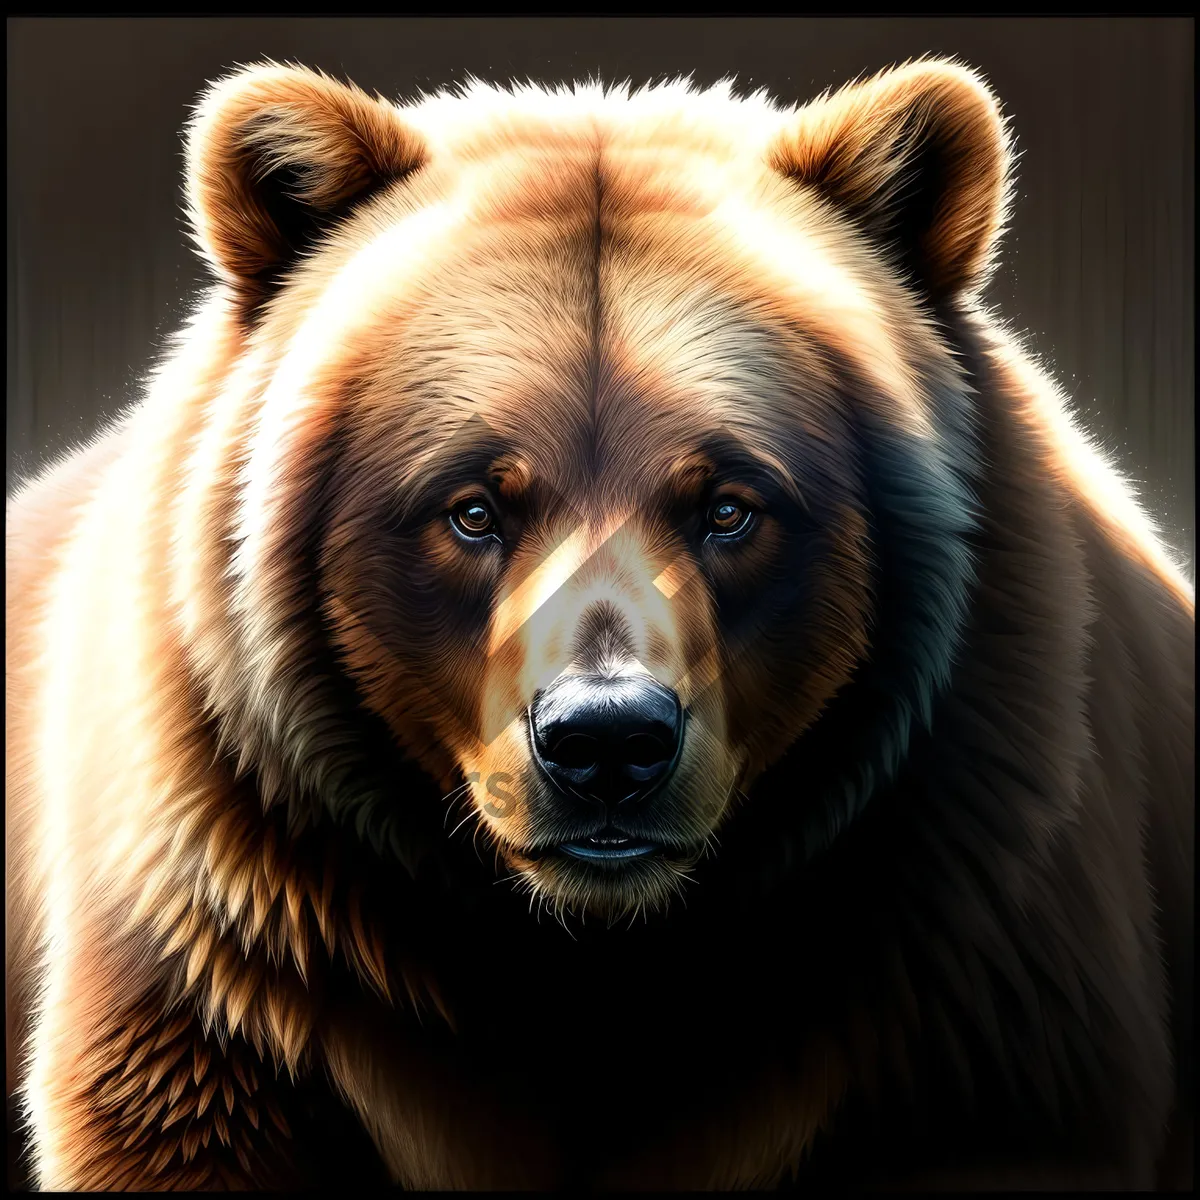 Picture of Wild Brown Bear - Majestic and Fierce Mammal